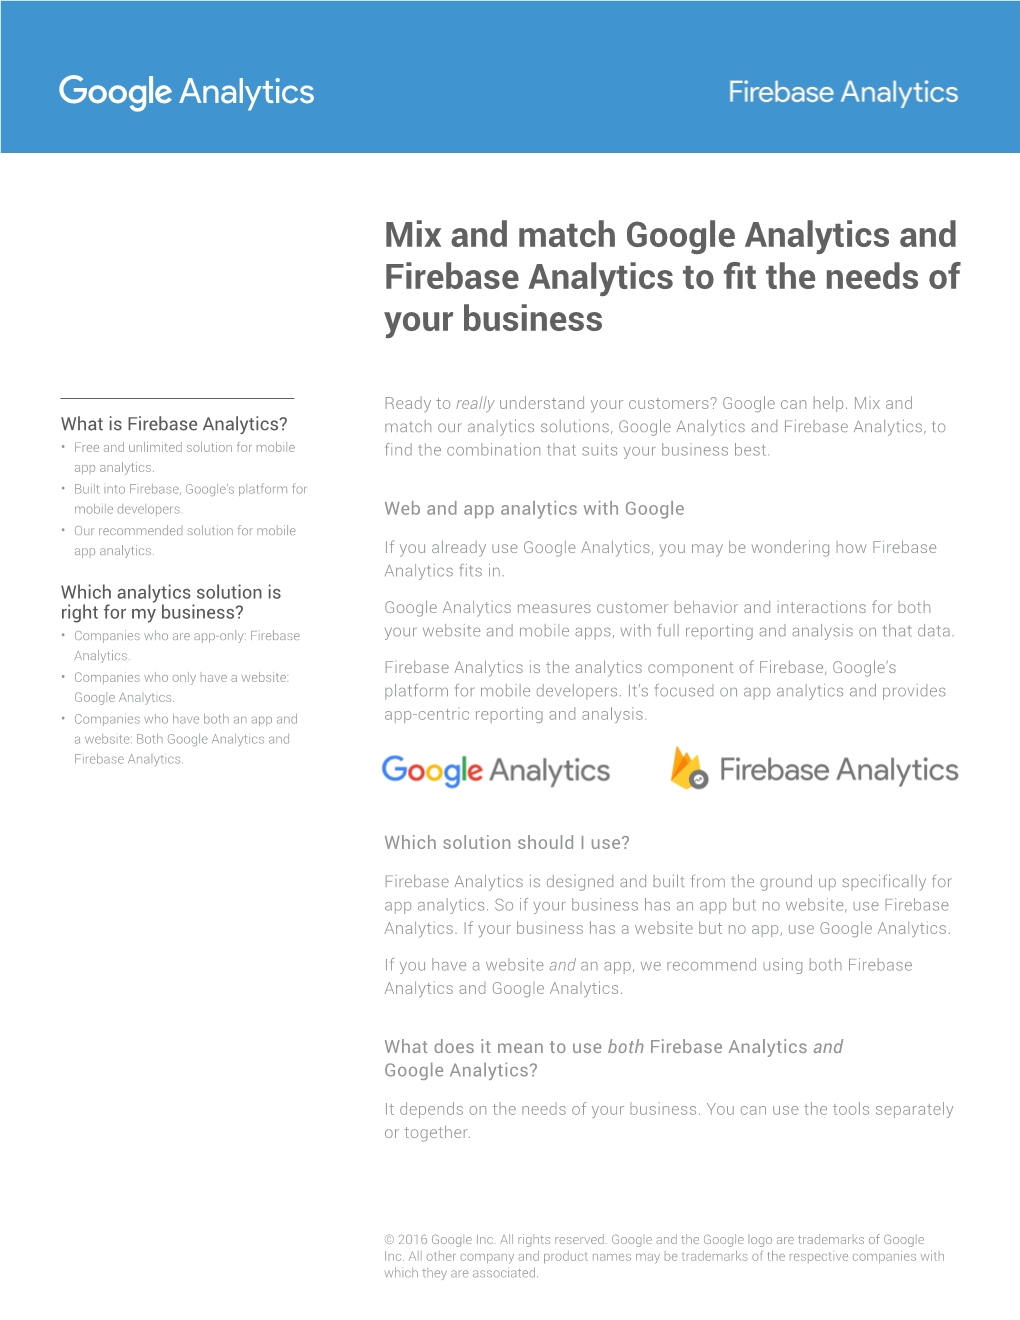 Mix and Match Google Analytics and Firebase Analytics to Fit the Needs of Your Business